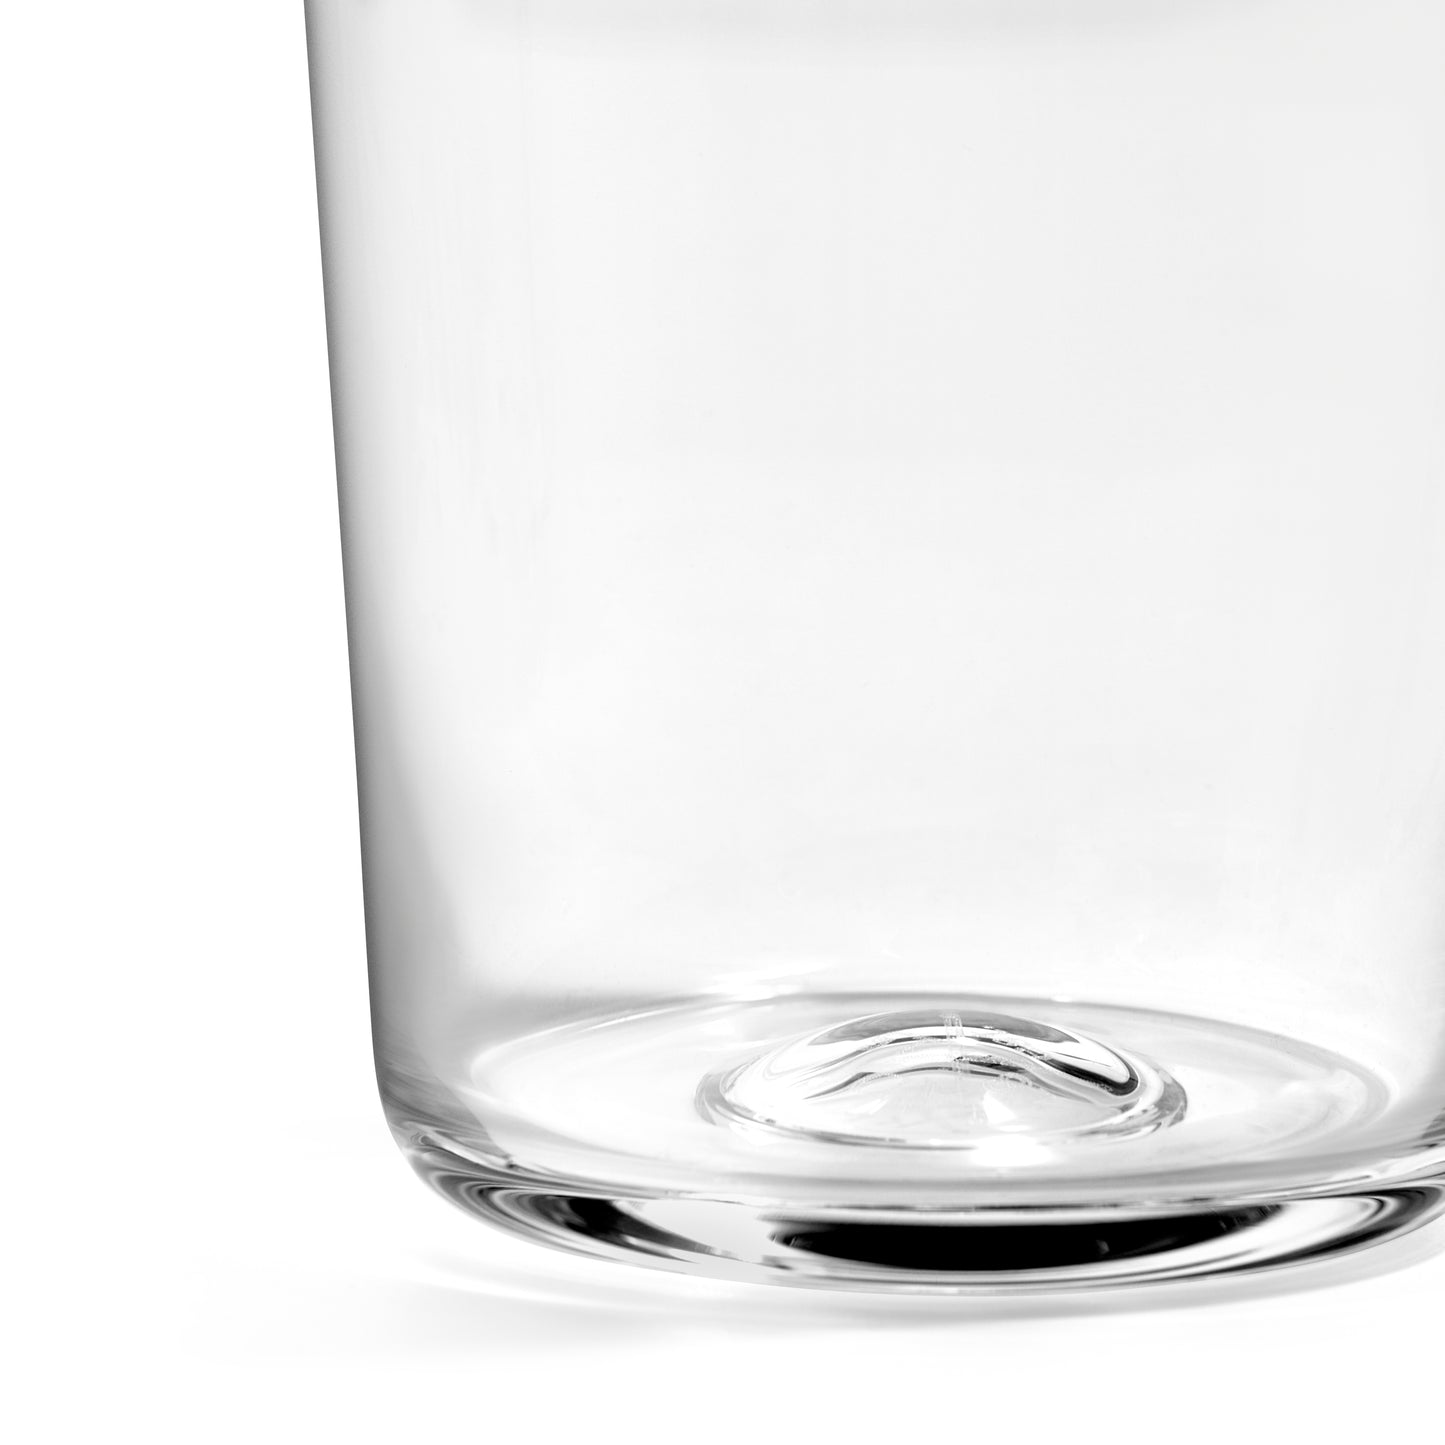 Royal Doulton 1815 Glass Highball, Clear (Set of 4)